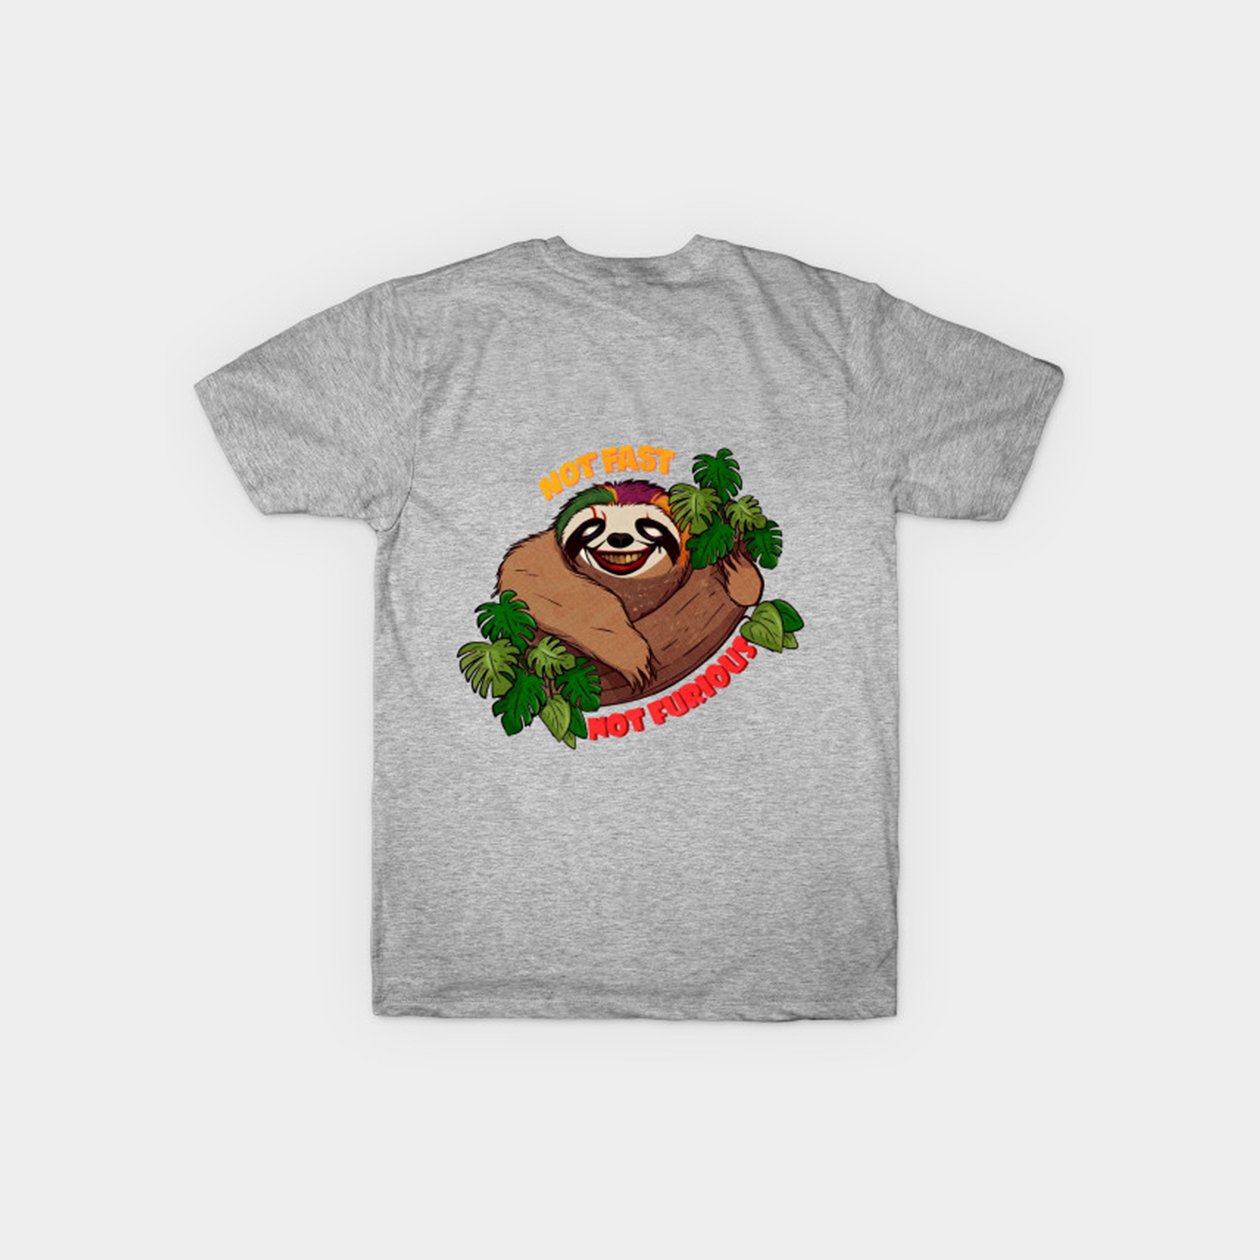 Not Fast Not Furious, Sloth T-Shirt